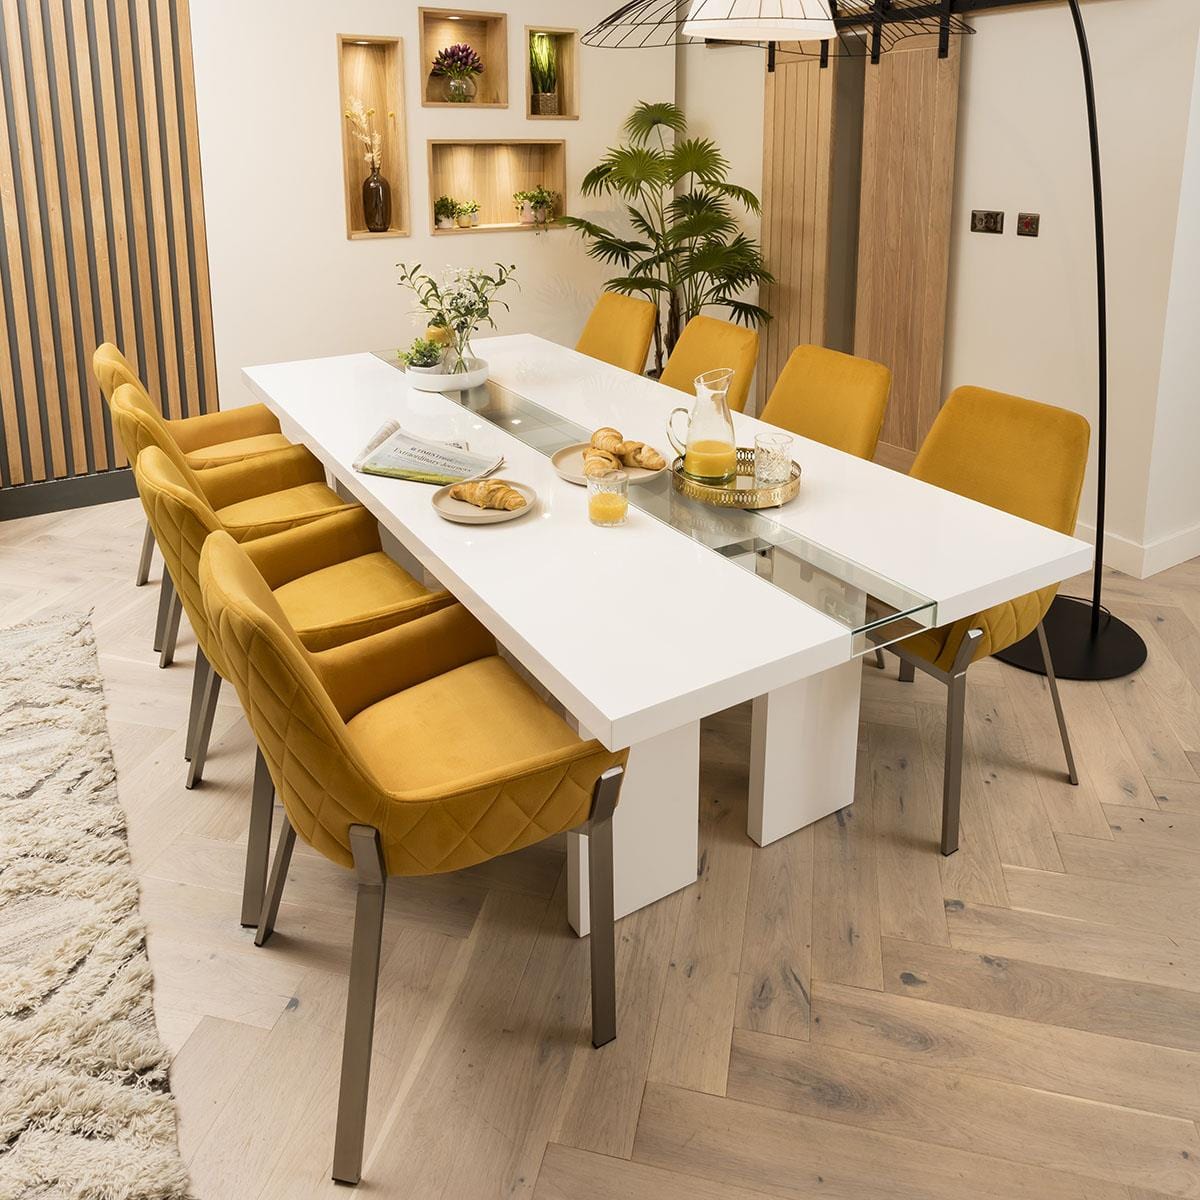 Quatropi Luna 8 Seater Dining Table and Chairs White Mustard